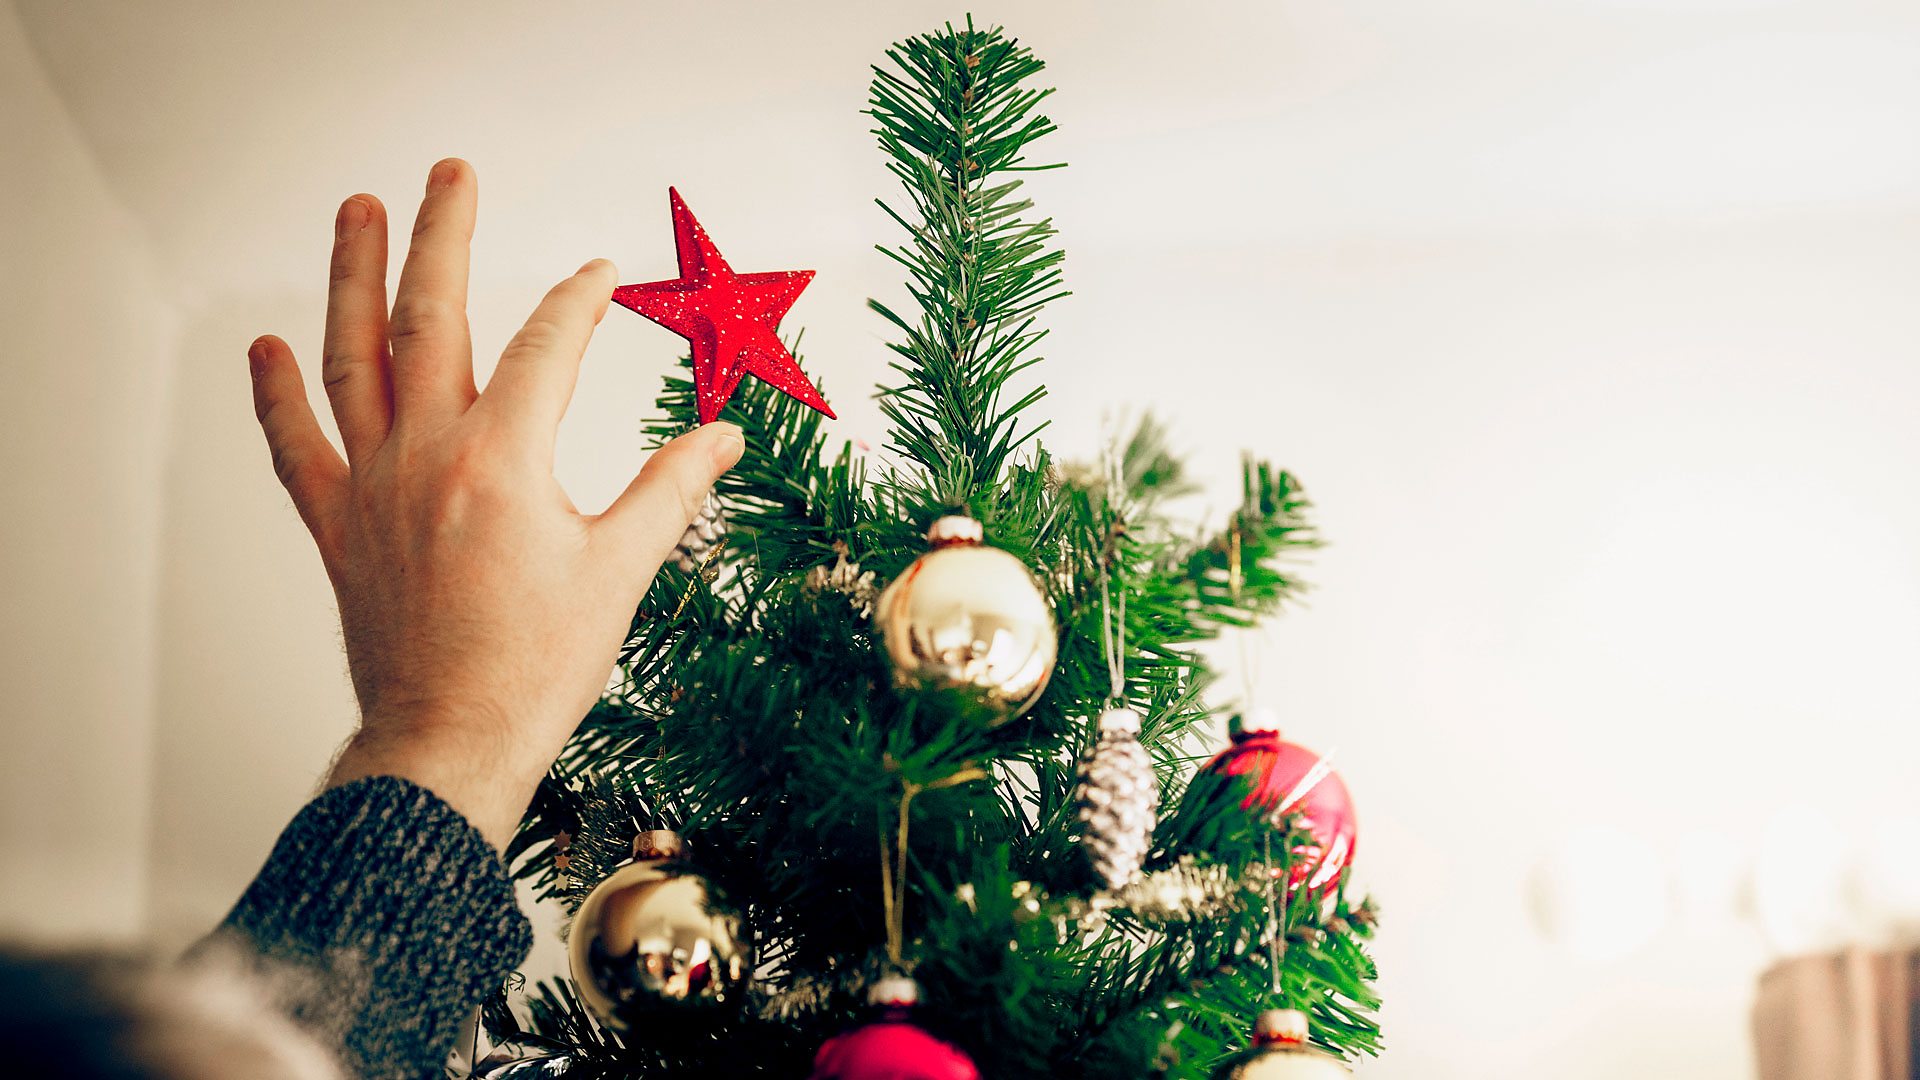 BBC - 12 top tips for the perfect Christmas